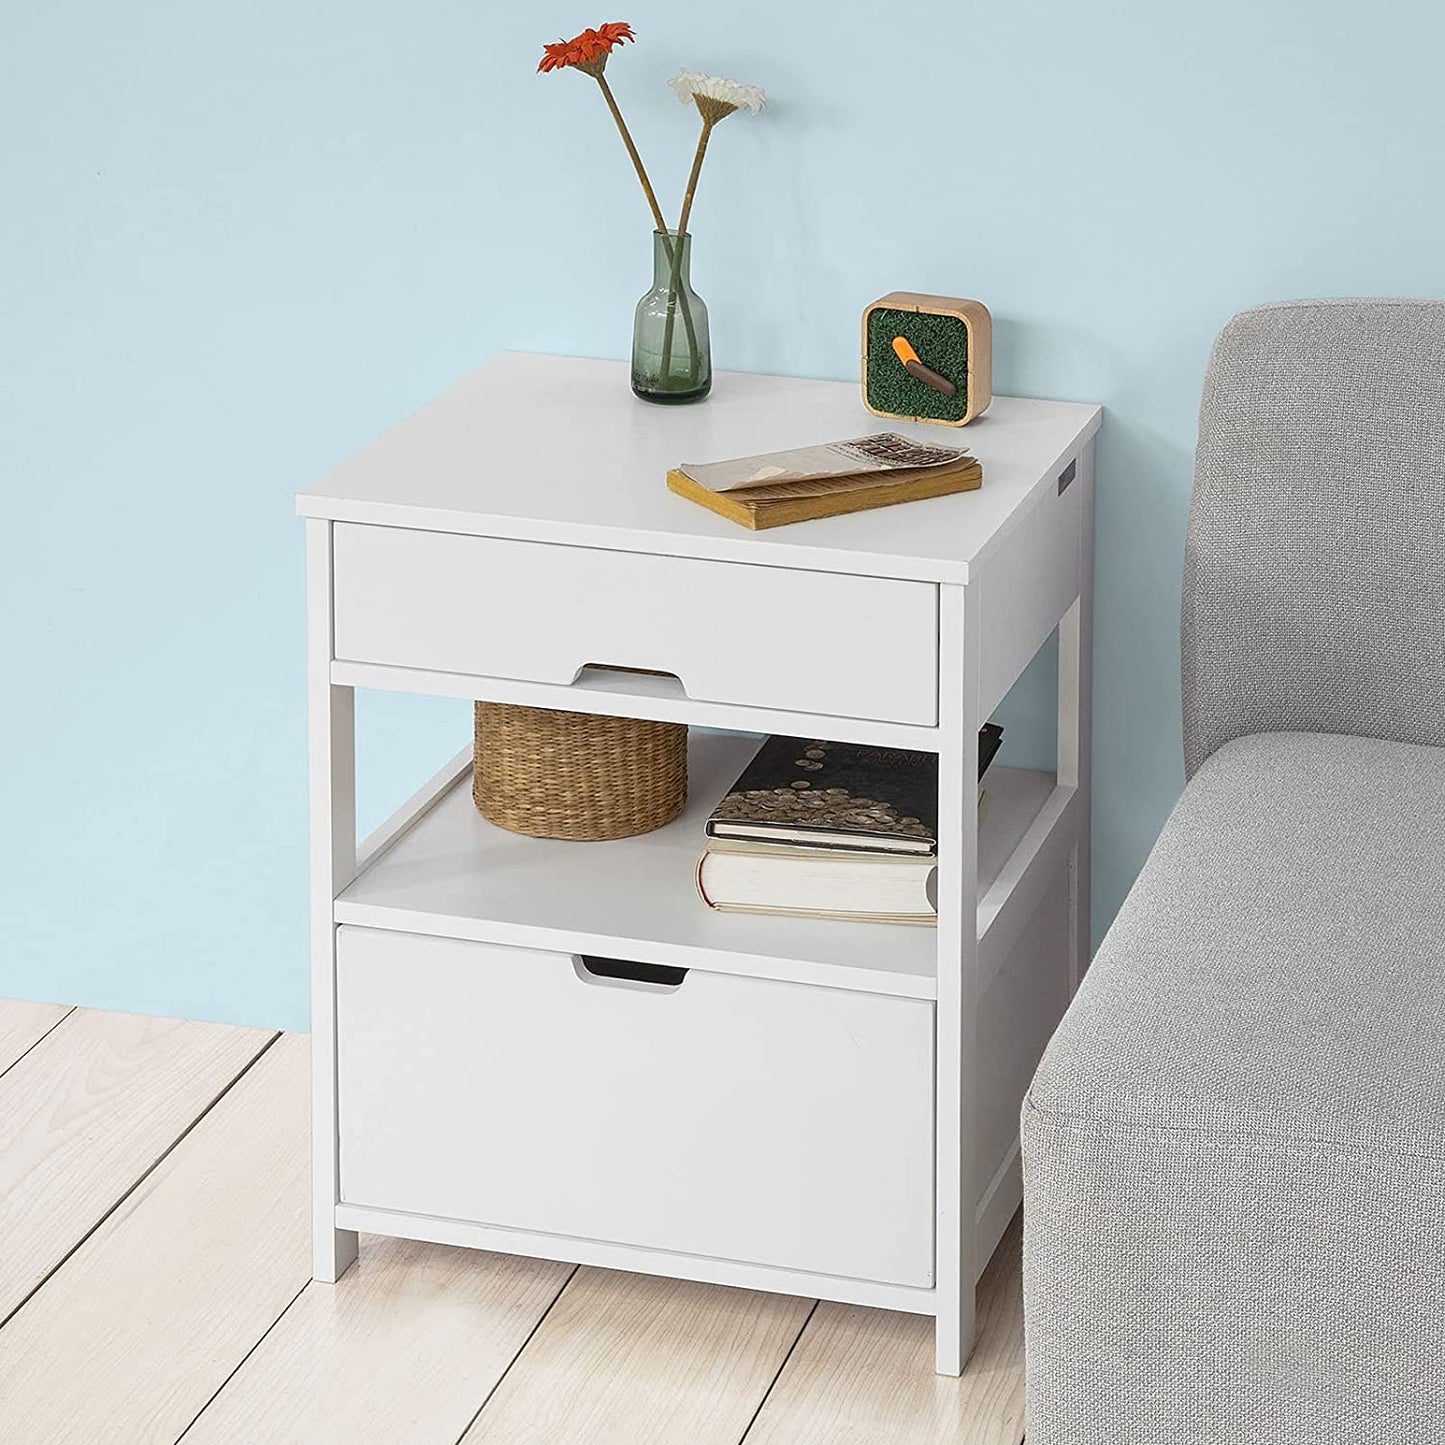 White Bedside Table with 2 Drawers - image2